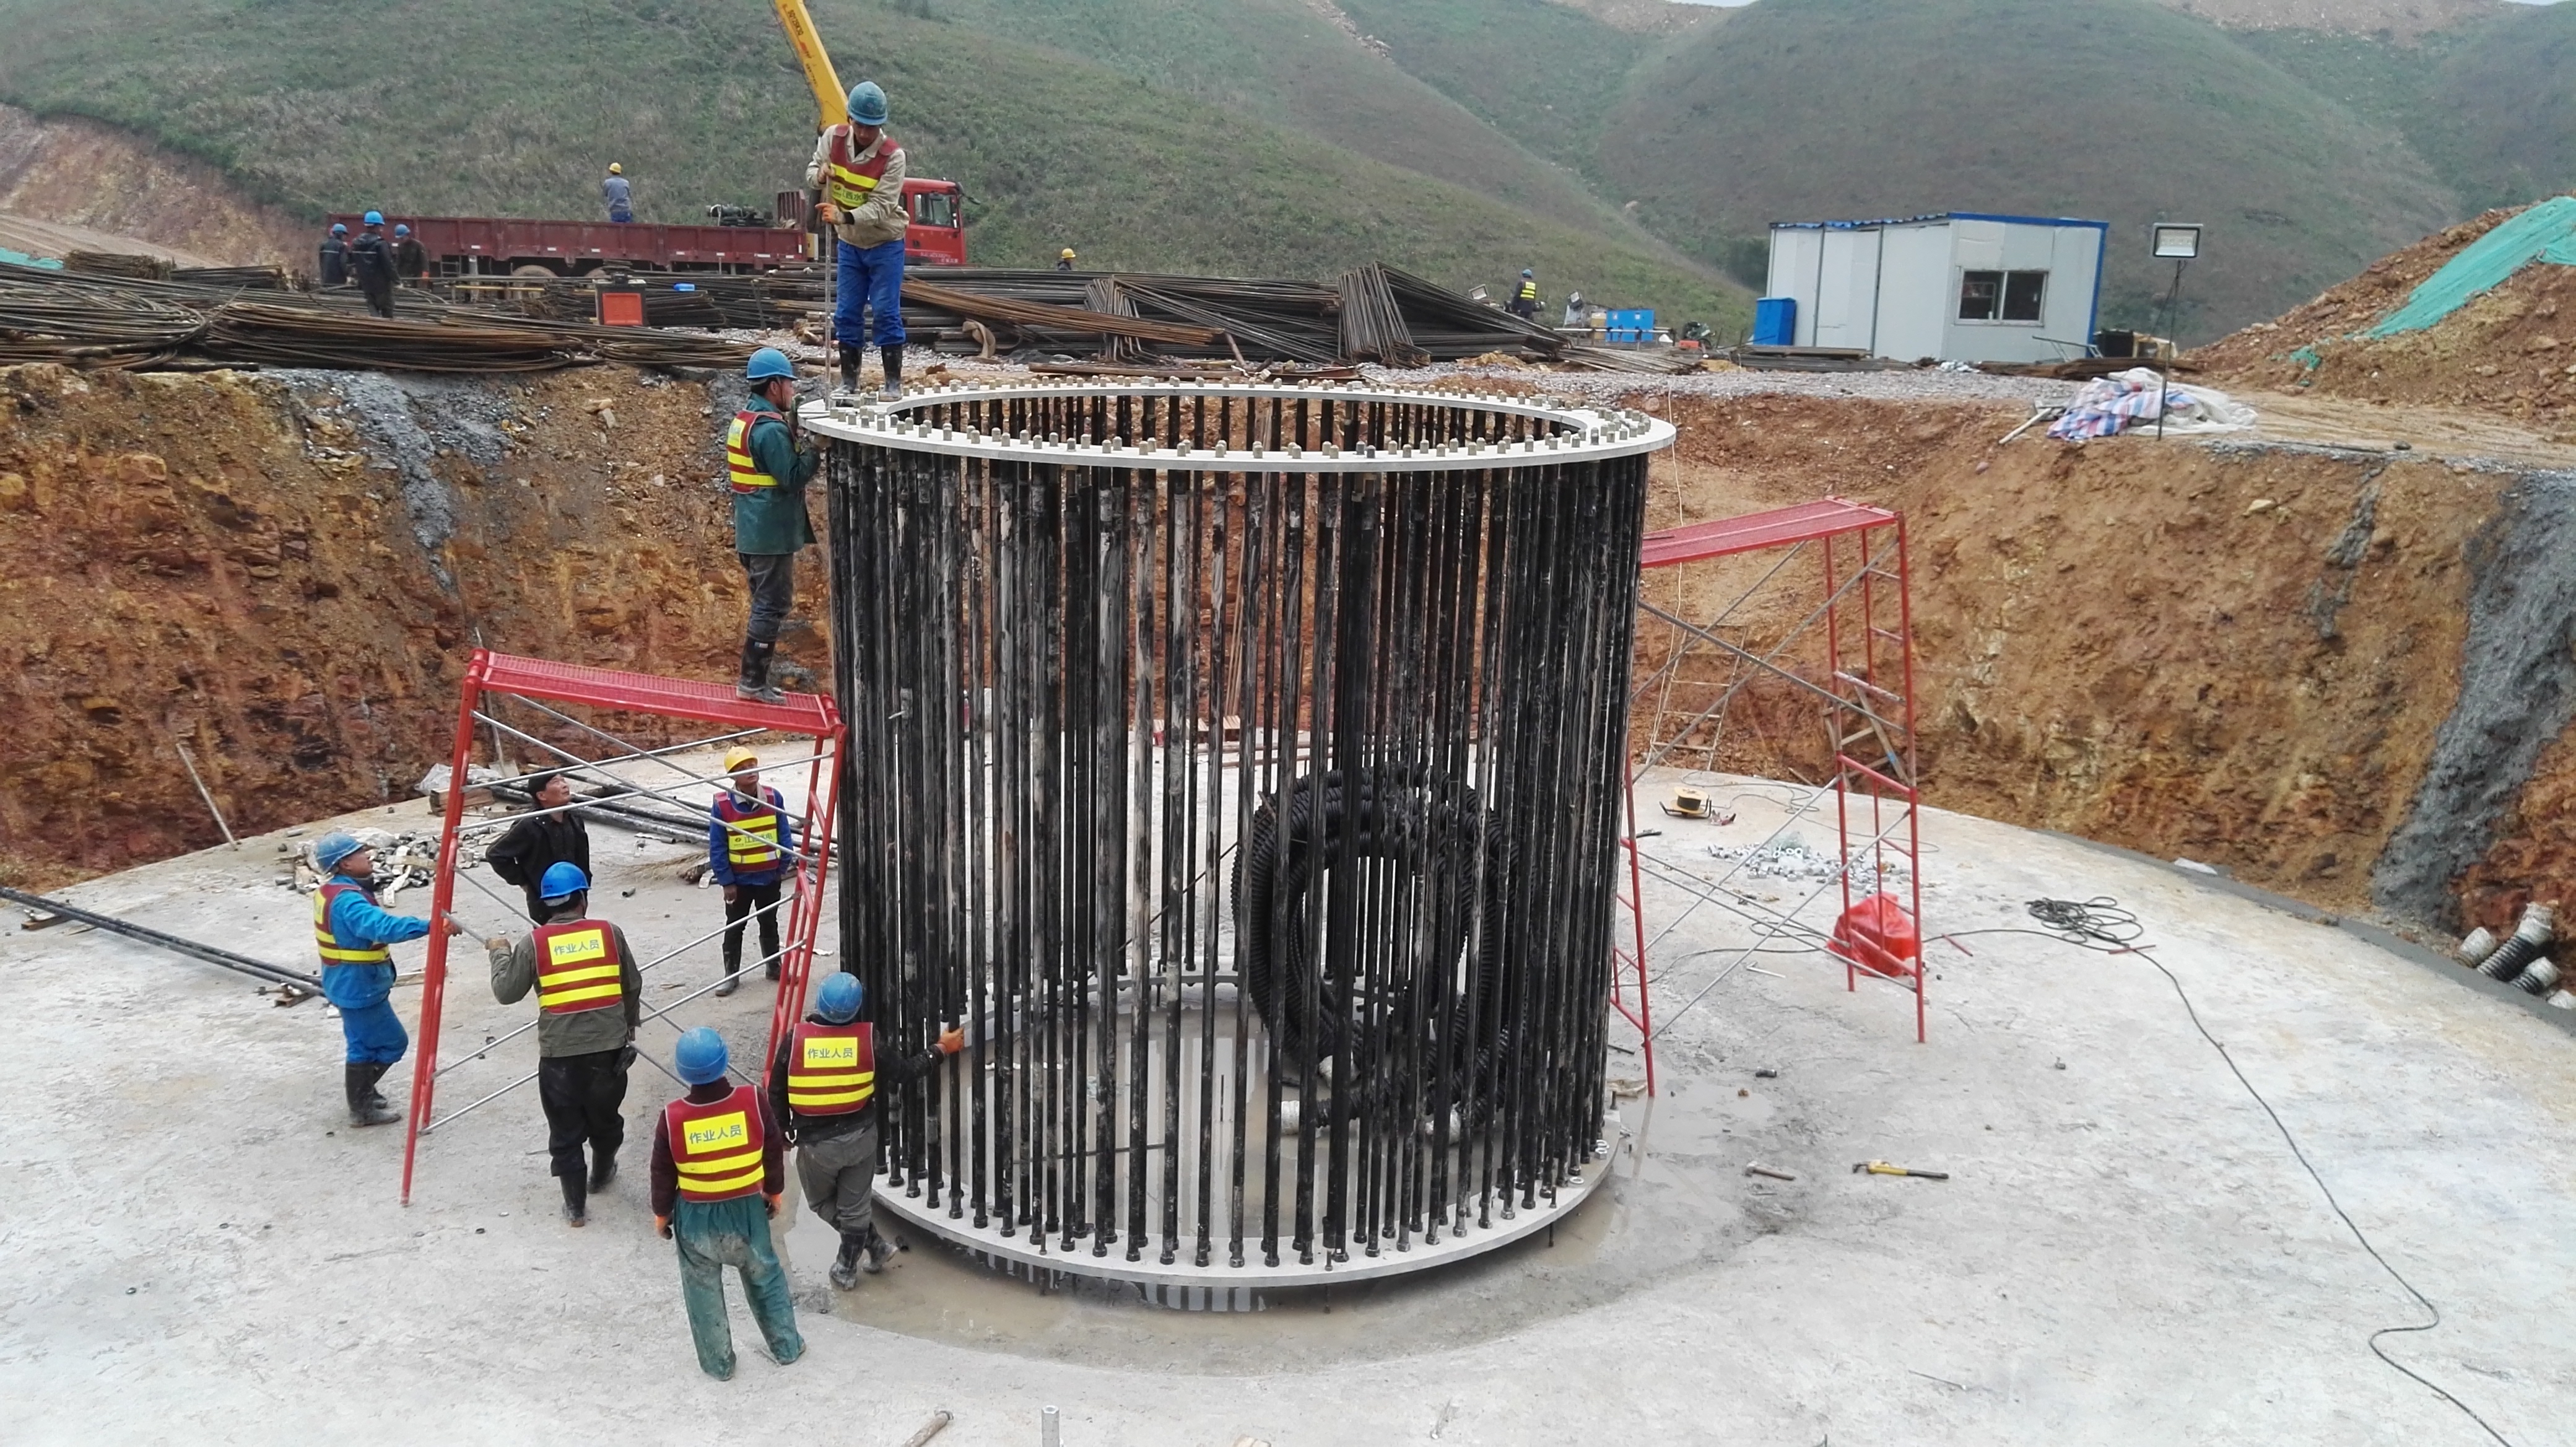 During Pedemic, JINHU Wind Farm Project was delayed but constructions resumed soon